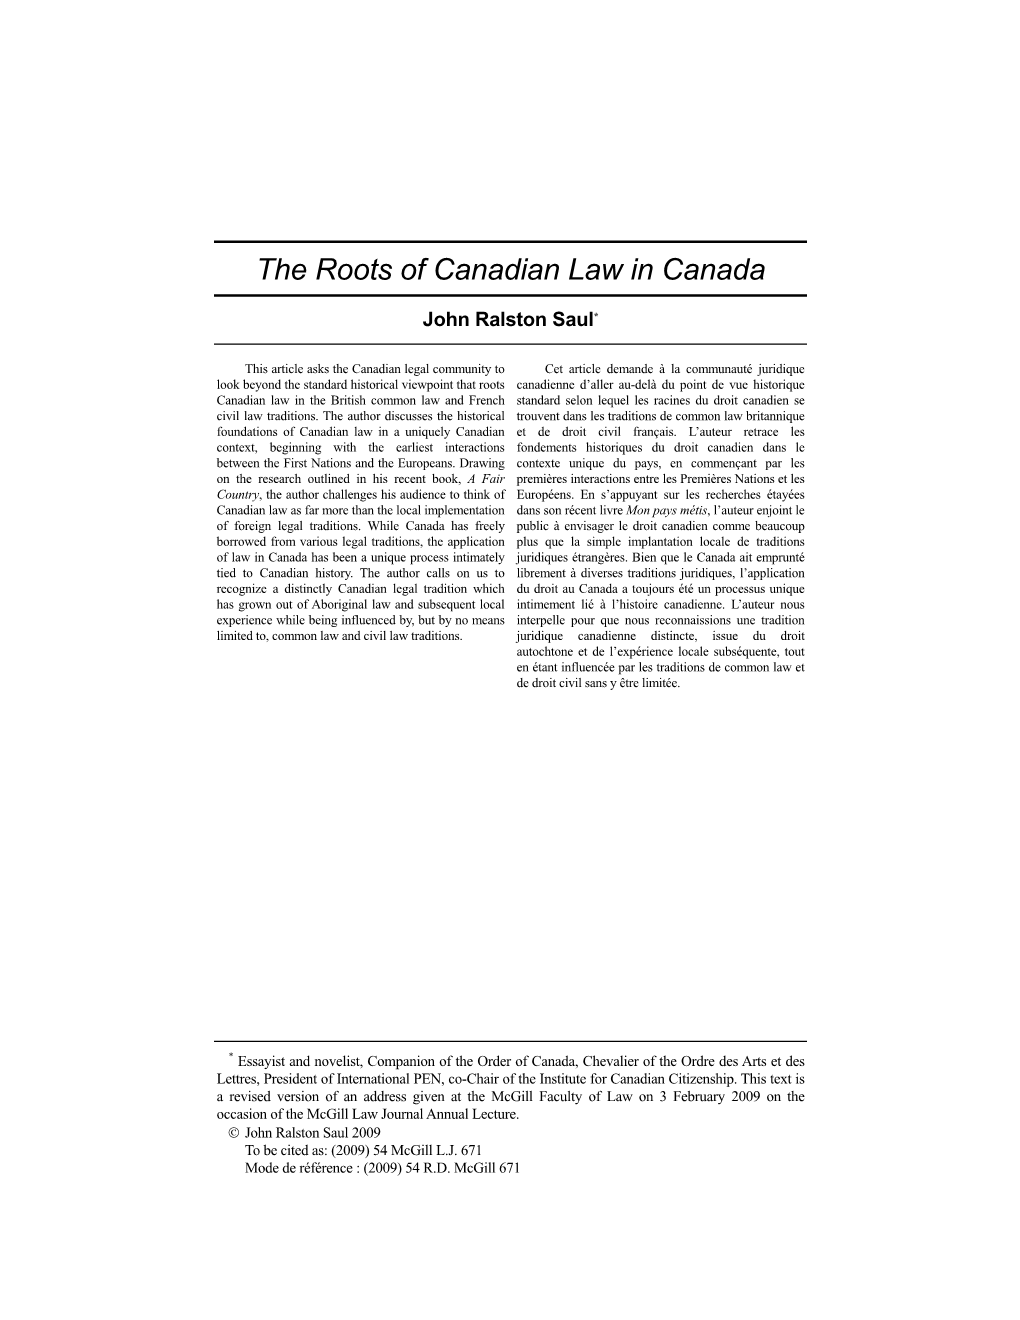 The Roots of Canadian Law in Canada